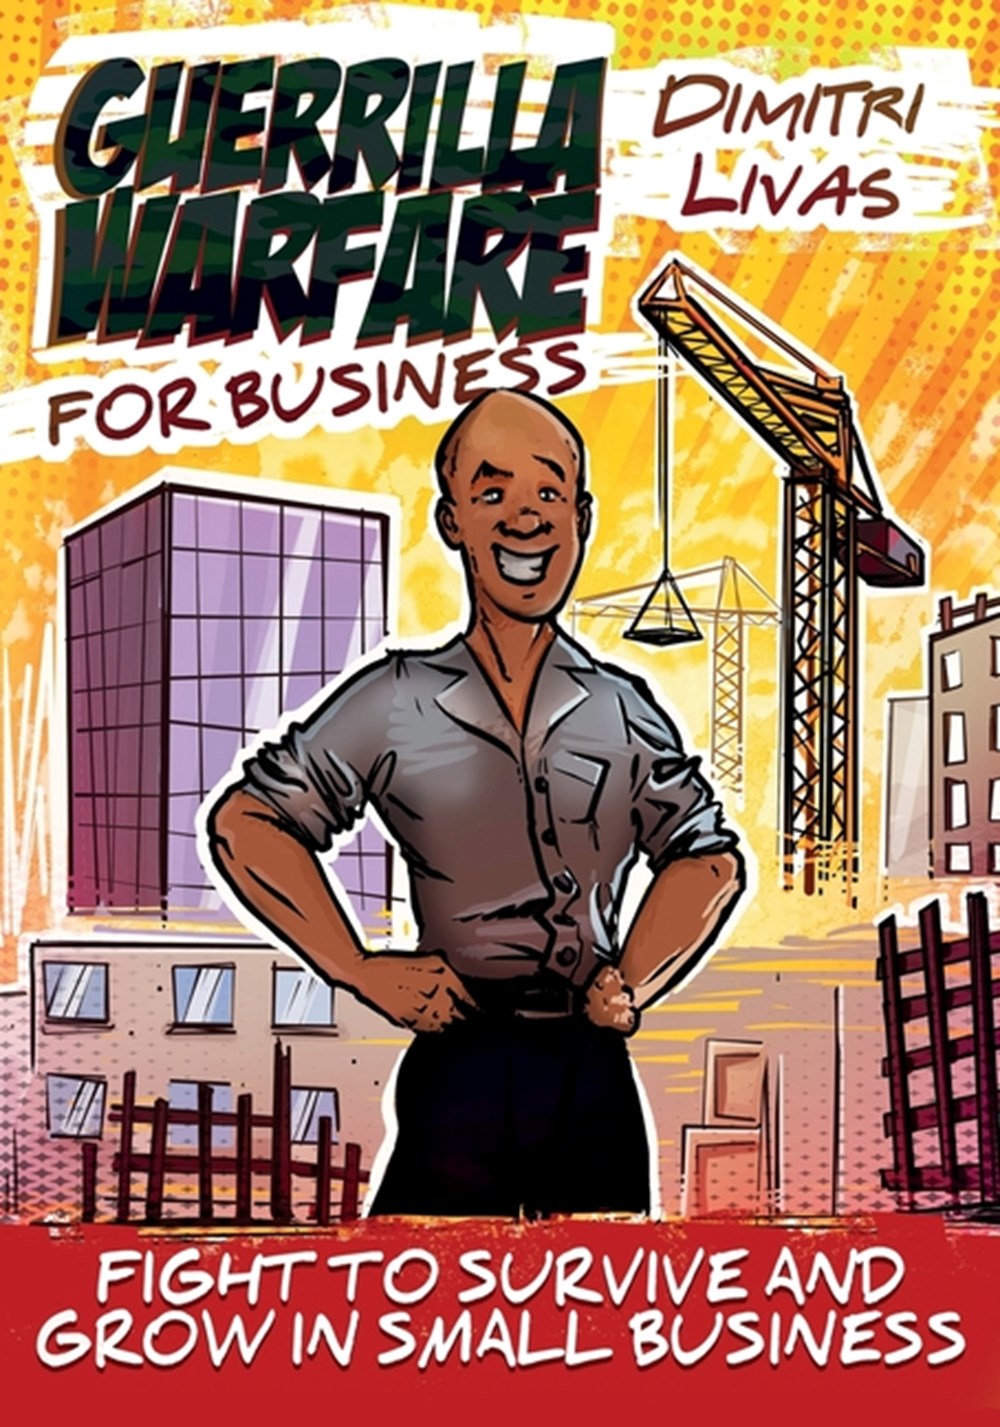 Guerrilla Warfare for Business - Comic Book Edition Fight to Survive and Grow in Small Business